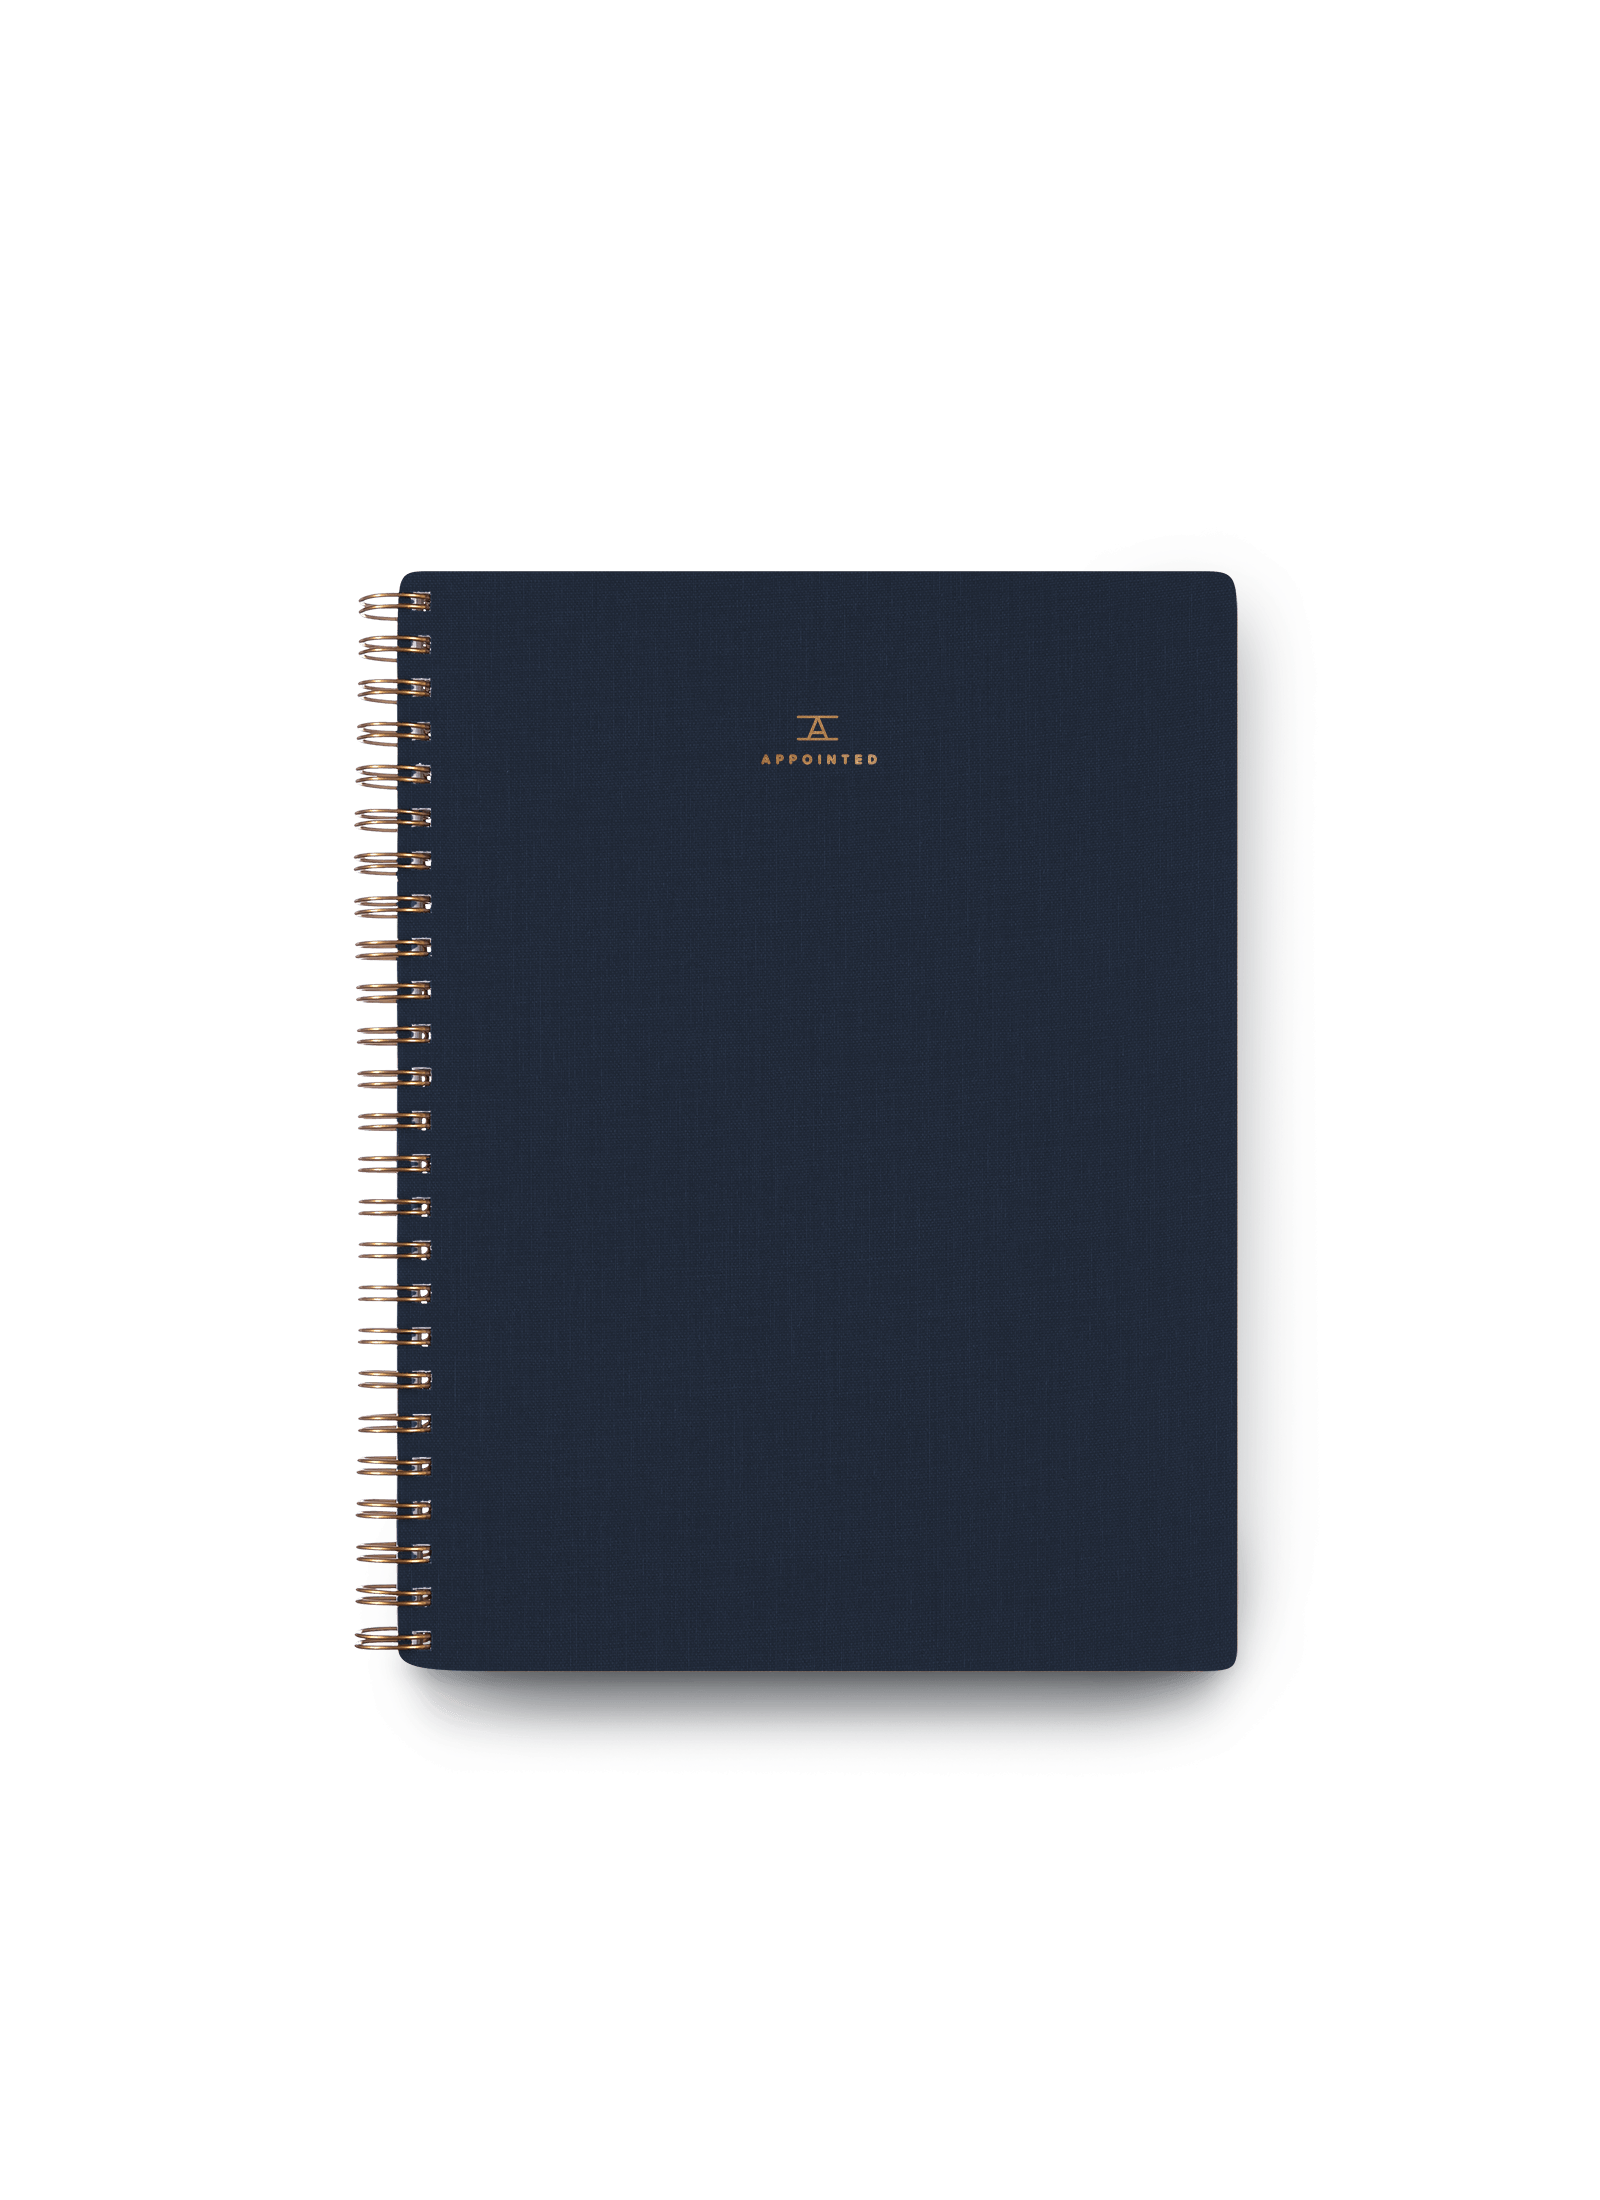 Appointed Workbook in Oxford Blue bookcloth with brass wire-o binding front cover || Oxford Blue